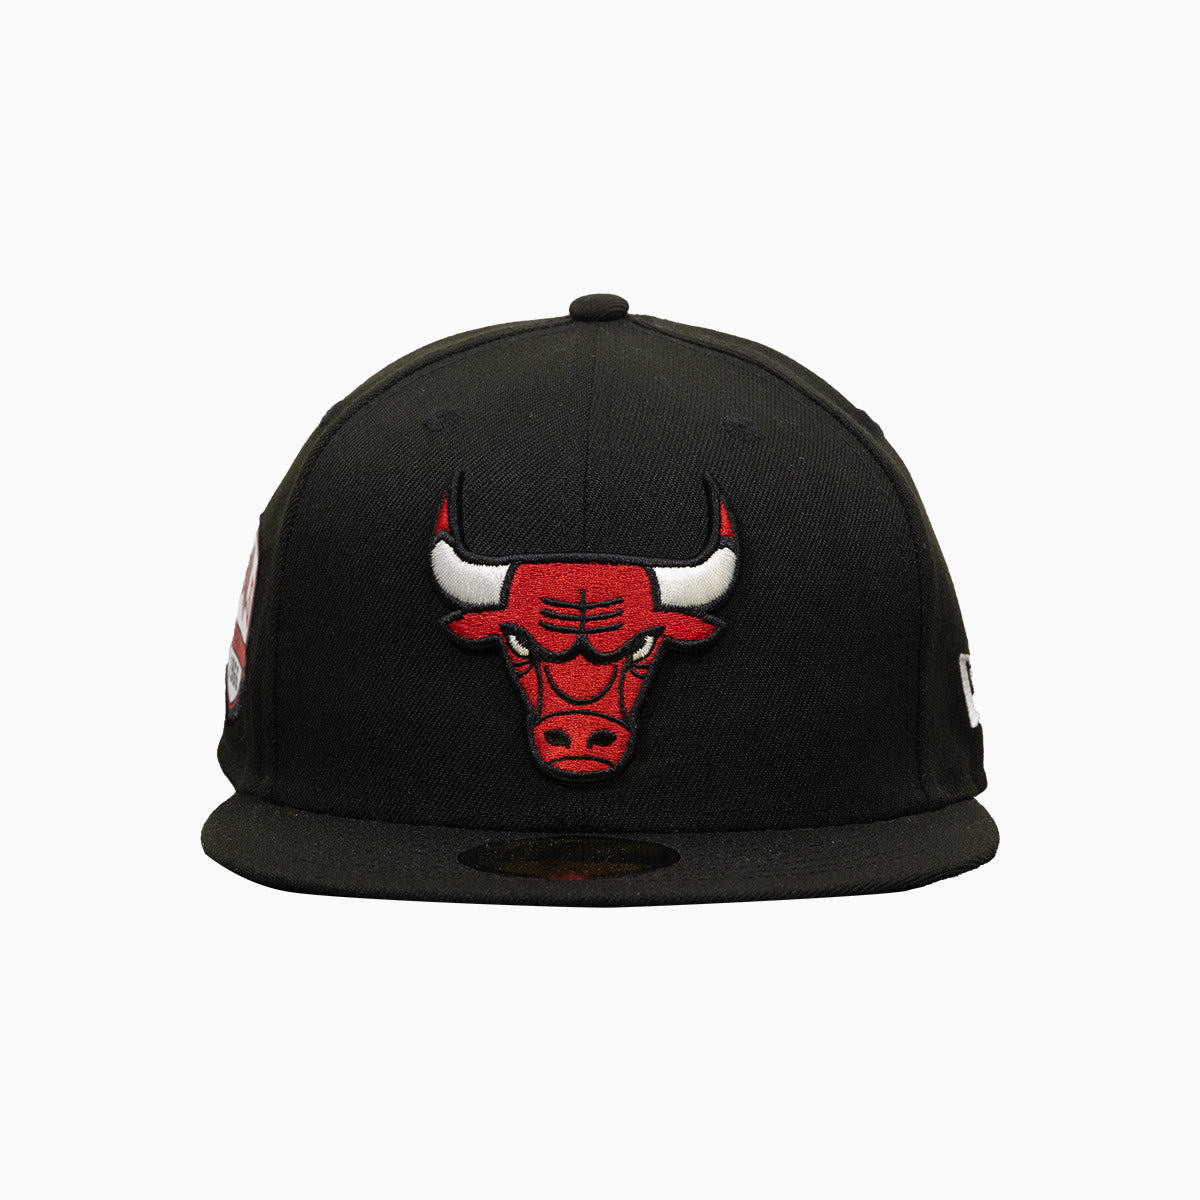 new-era-chicago-bulls-1966-nba-59fifty-fitted-hat-60197703